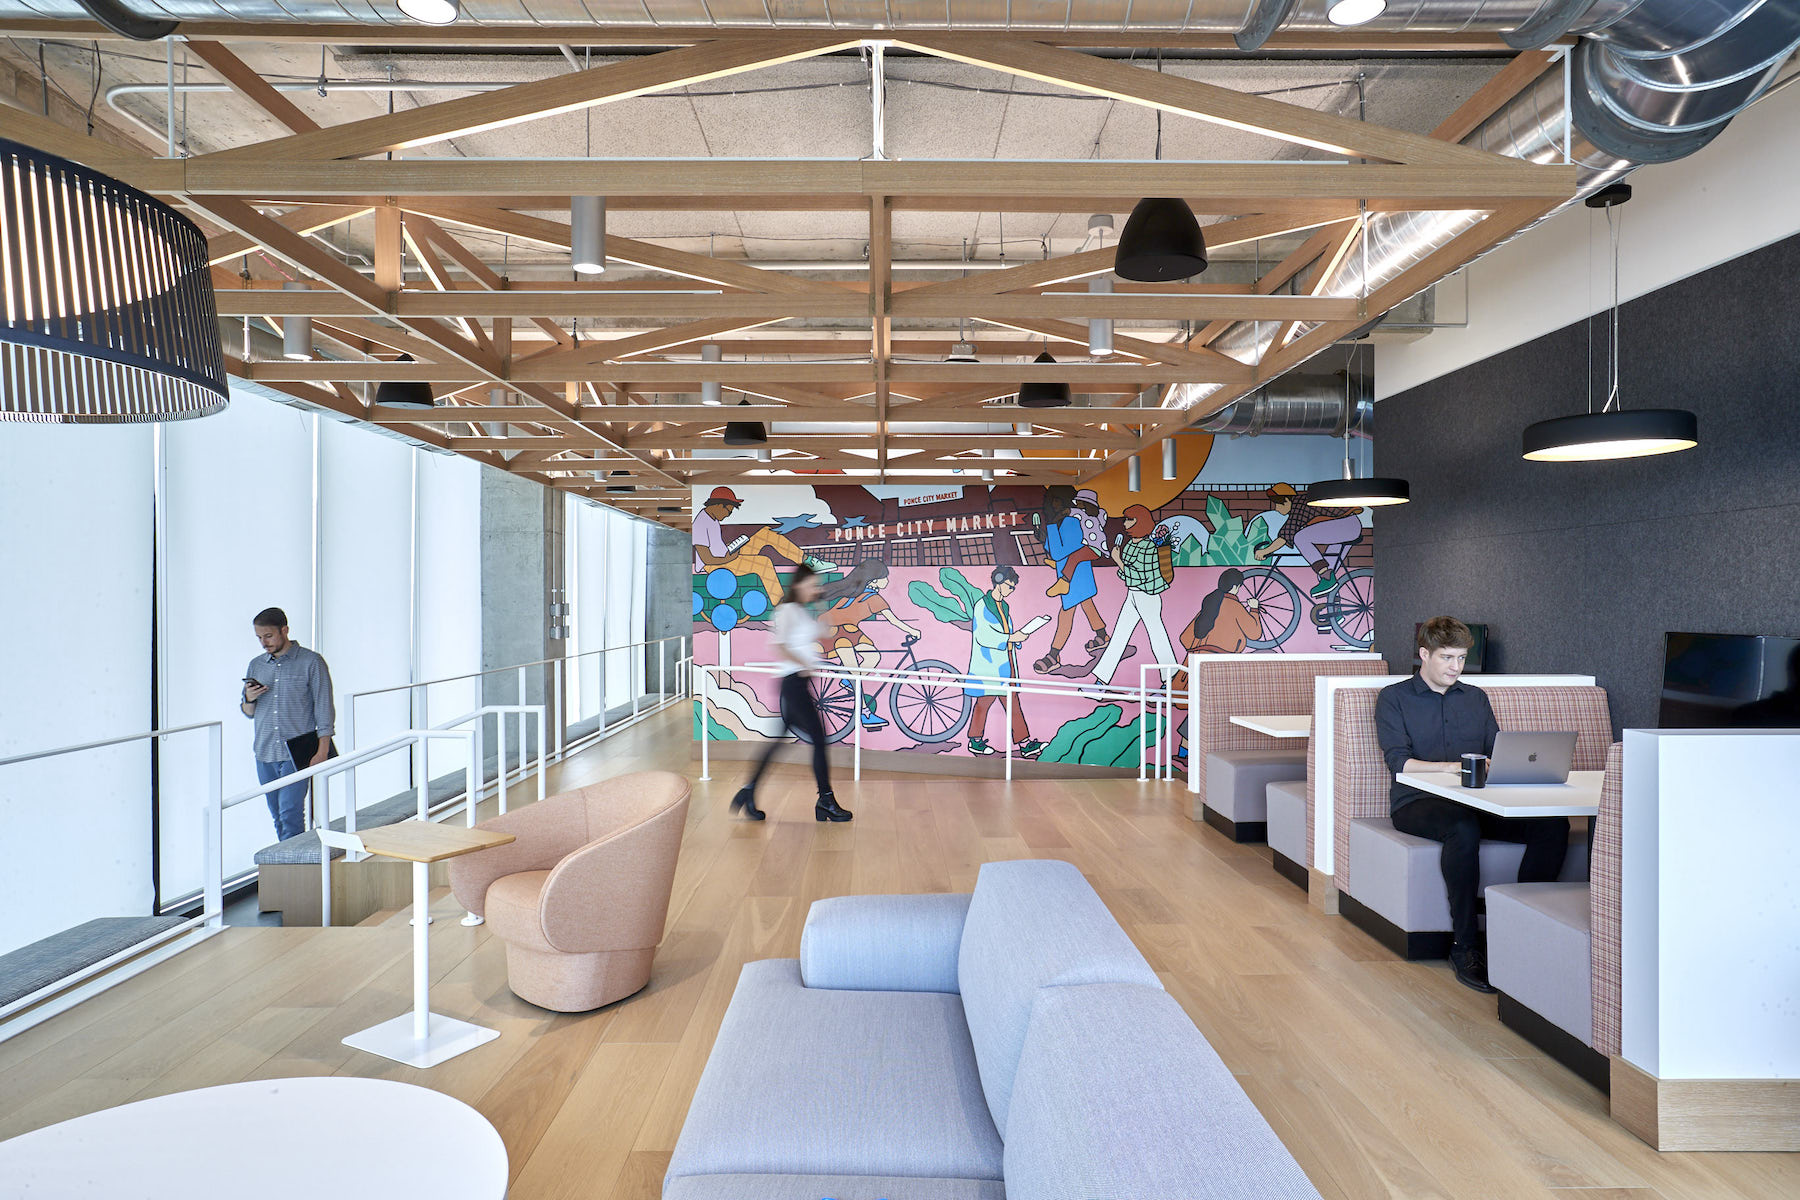 BlackRock's iHub in Atlanta is designed to expand as the asset management giant adds more workers. Images: Garret Rowland